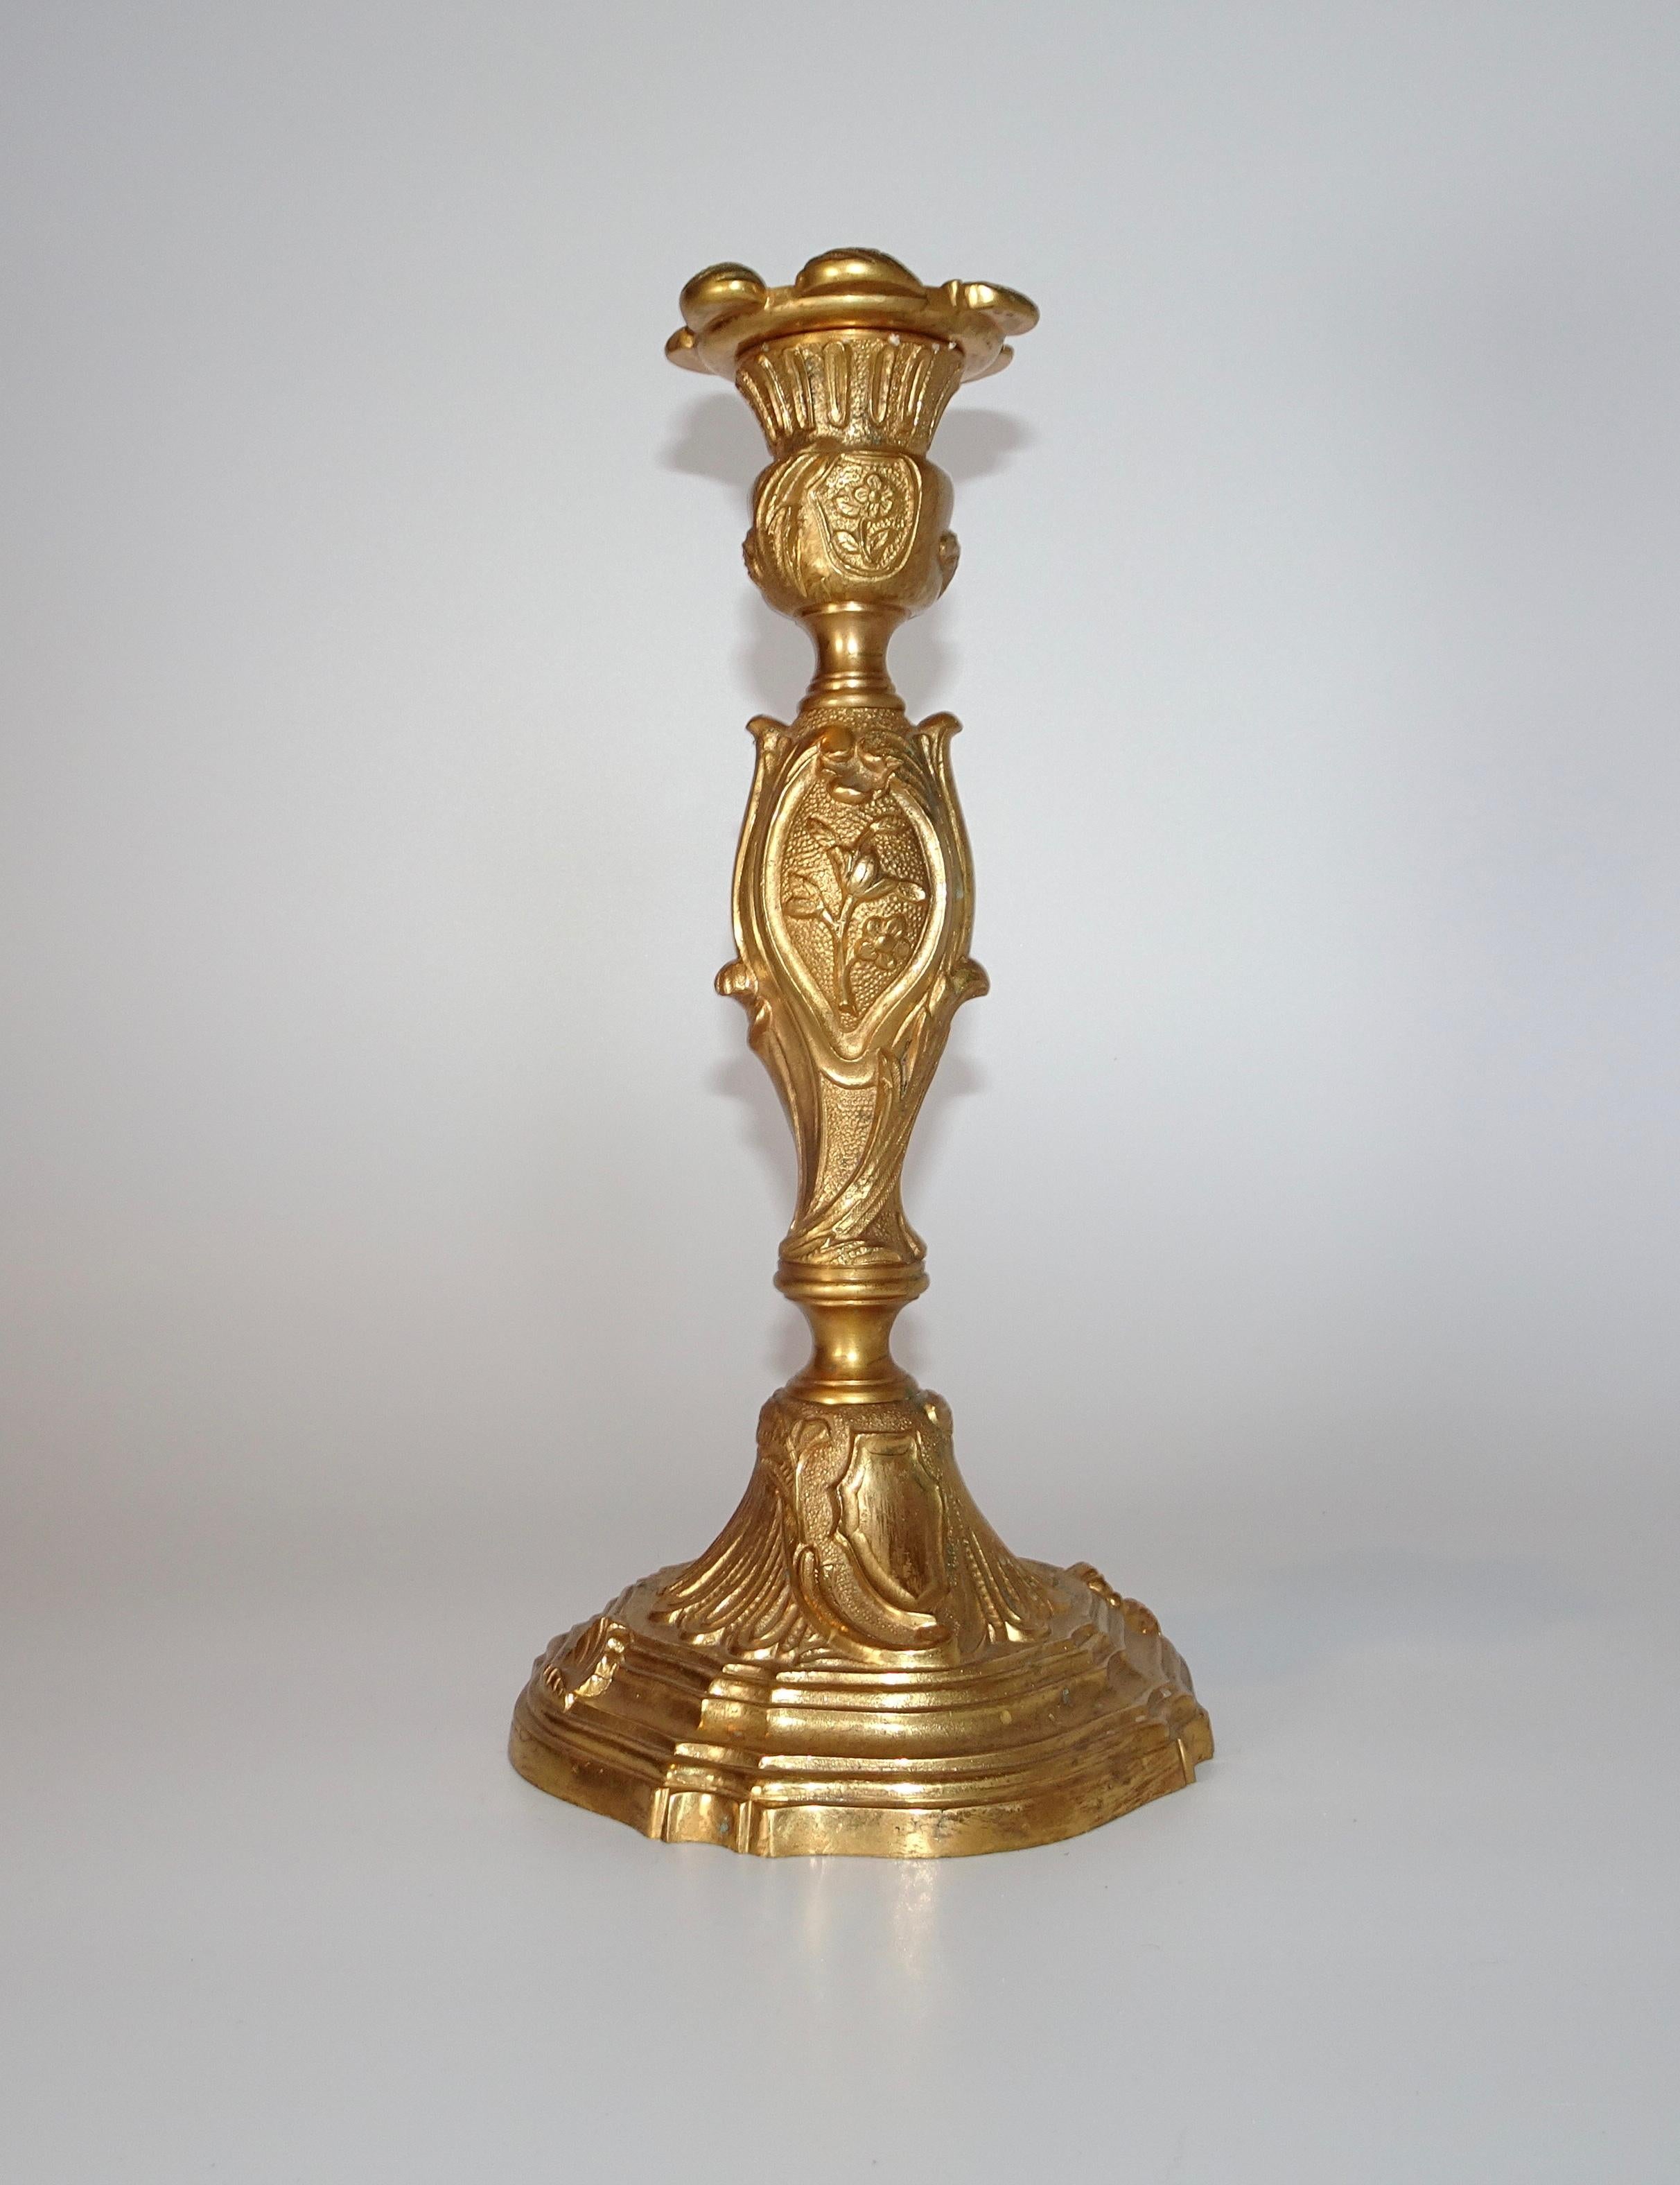 19th Century French Gold Doré Candlestick In Excellent Condition For Sale In Nashville, TN